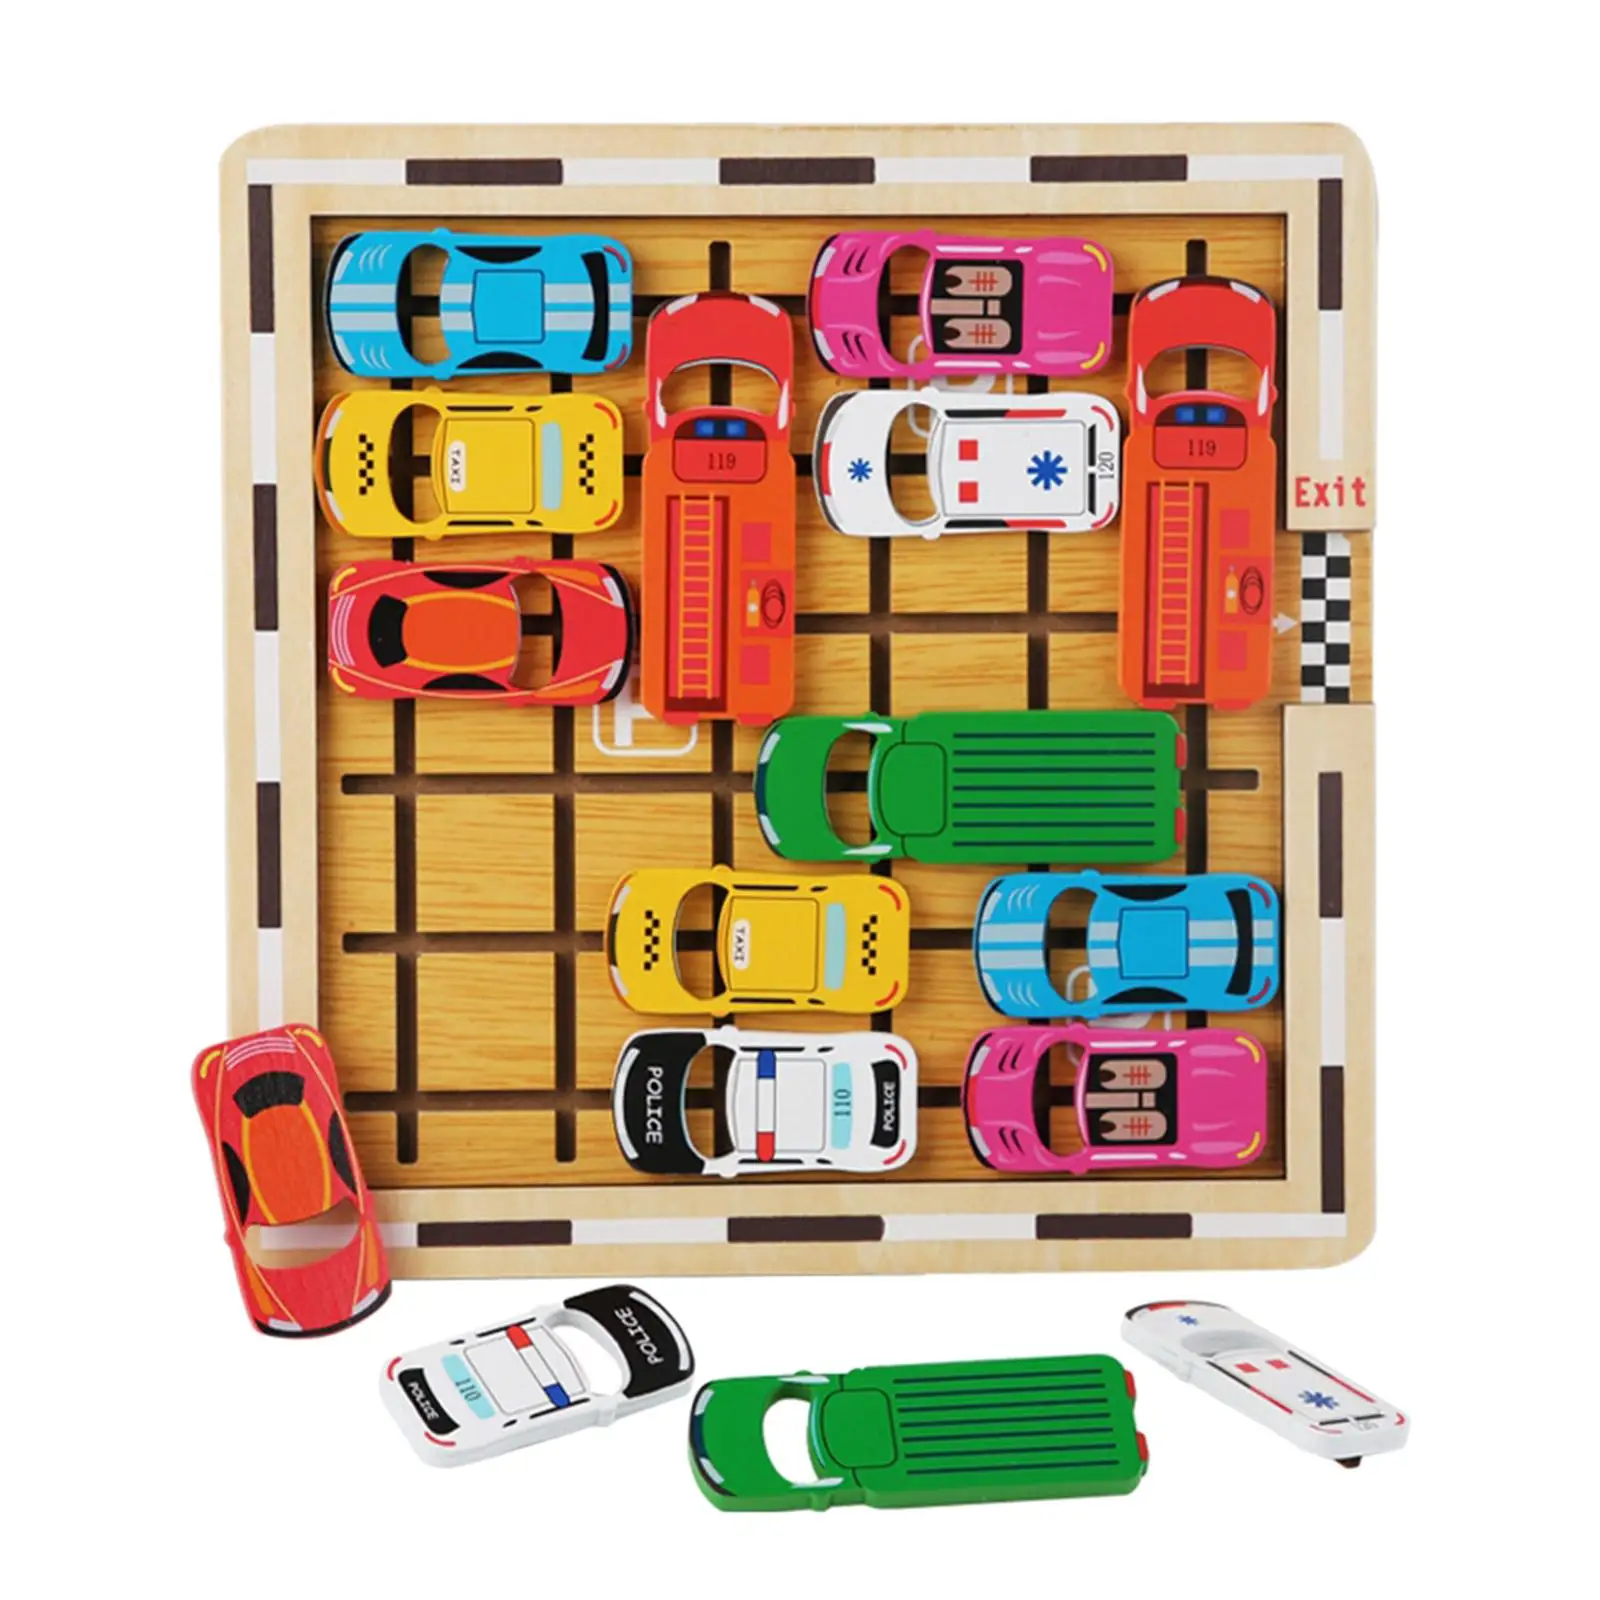 Wooden Early Education Car Exercise Brain Ability Sensory Toy Development Fine Motor Skills for Kids Toddlers Birthday Gifts